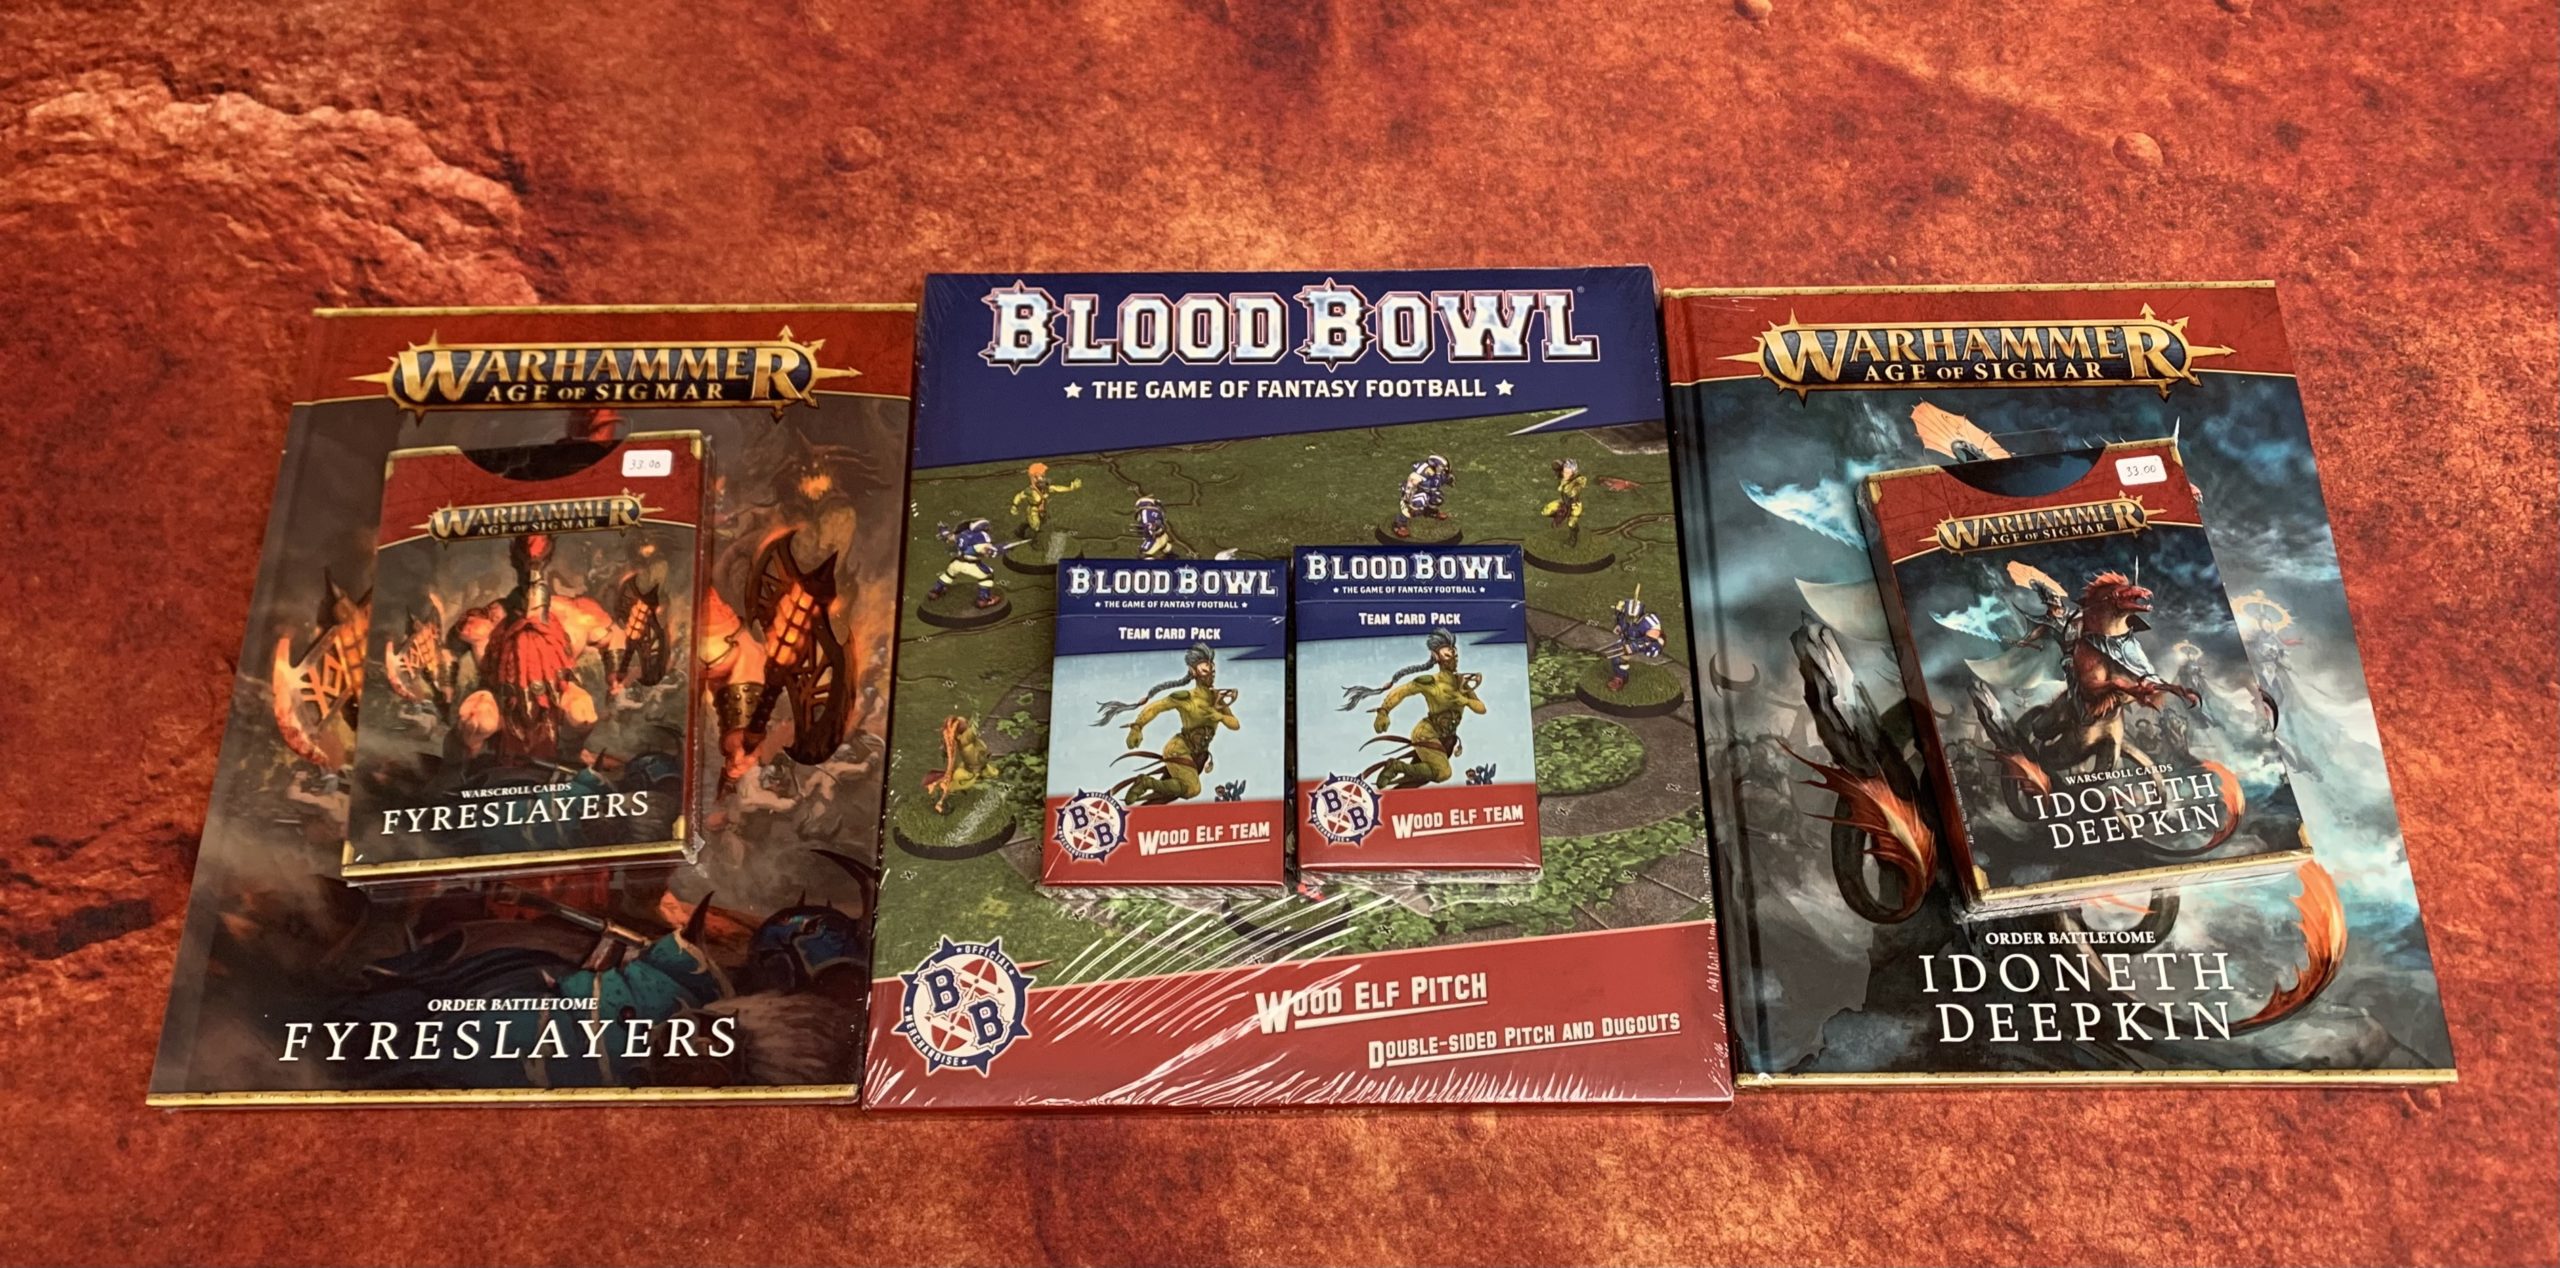 New Age of Sigmar and Blood Bowl!